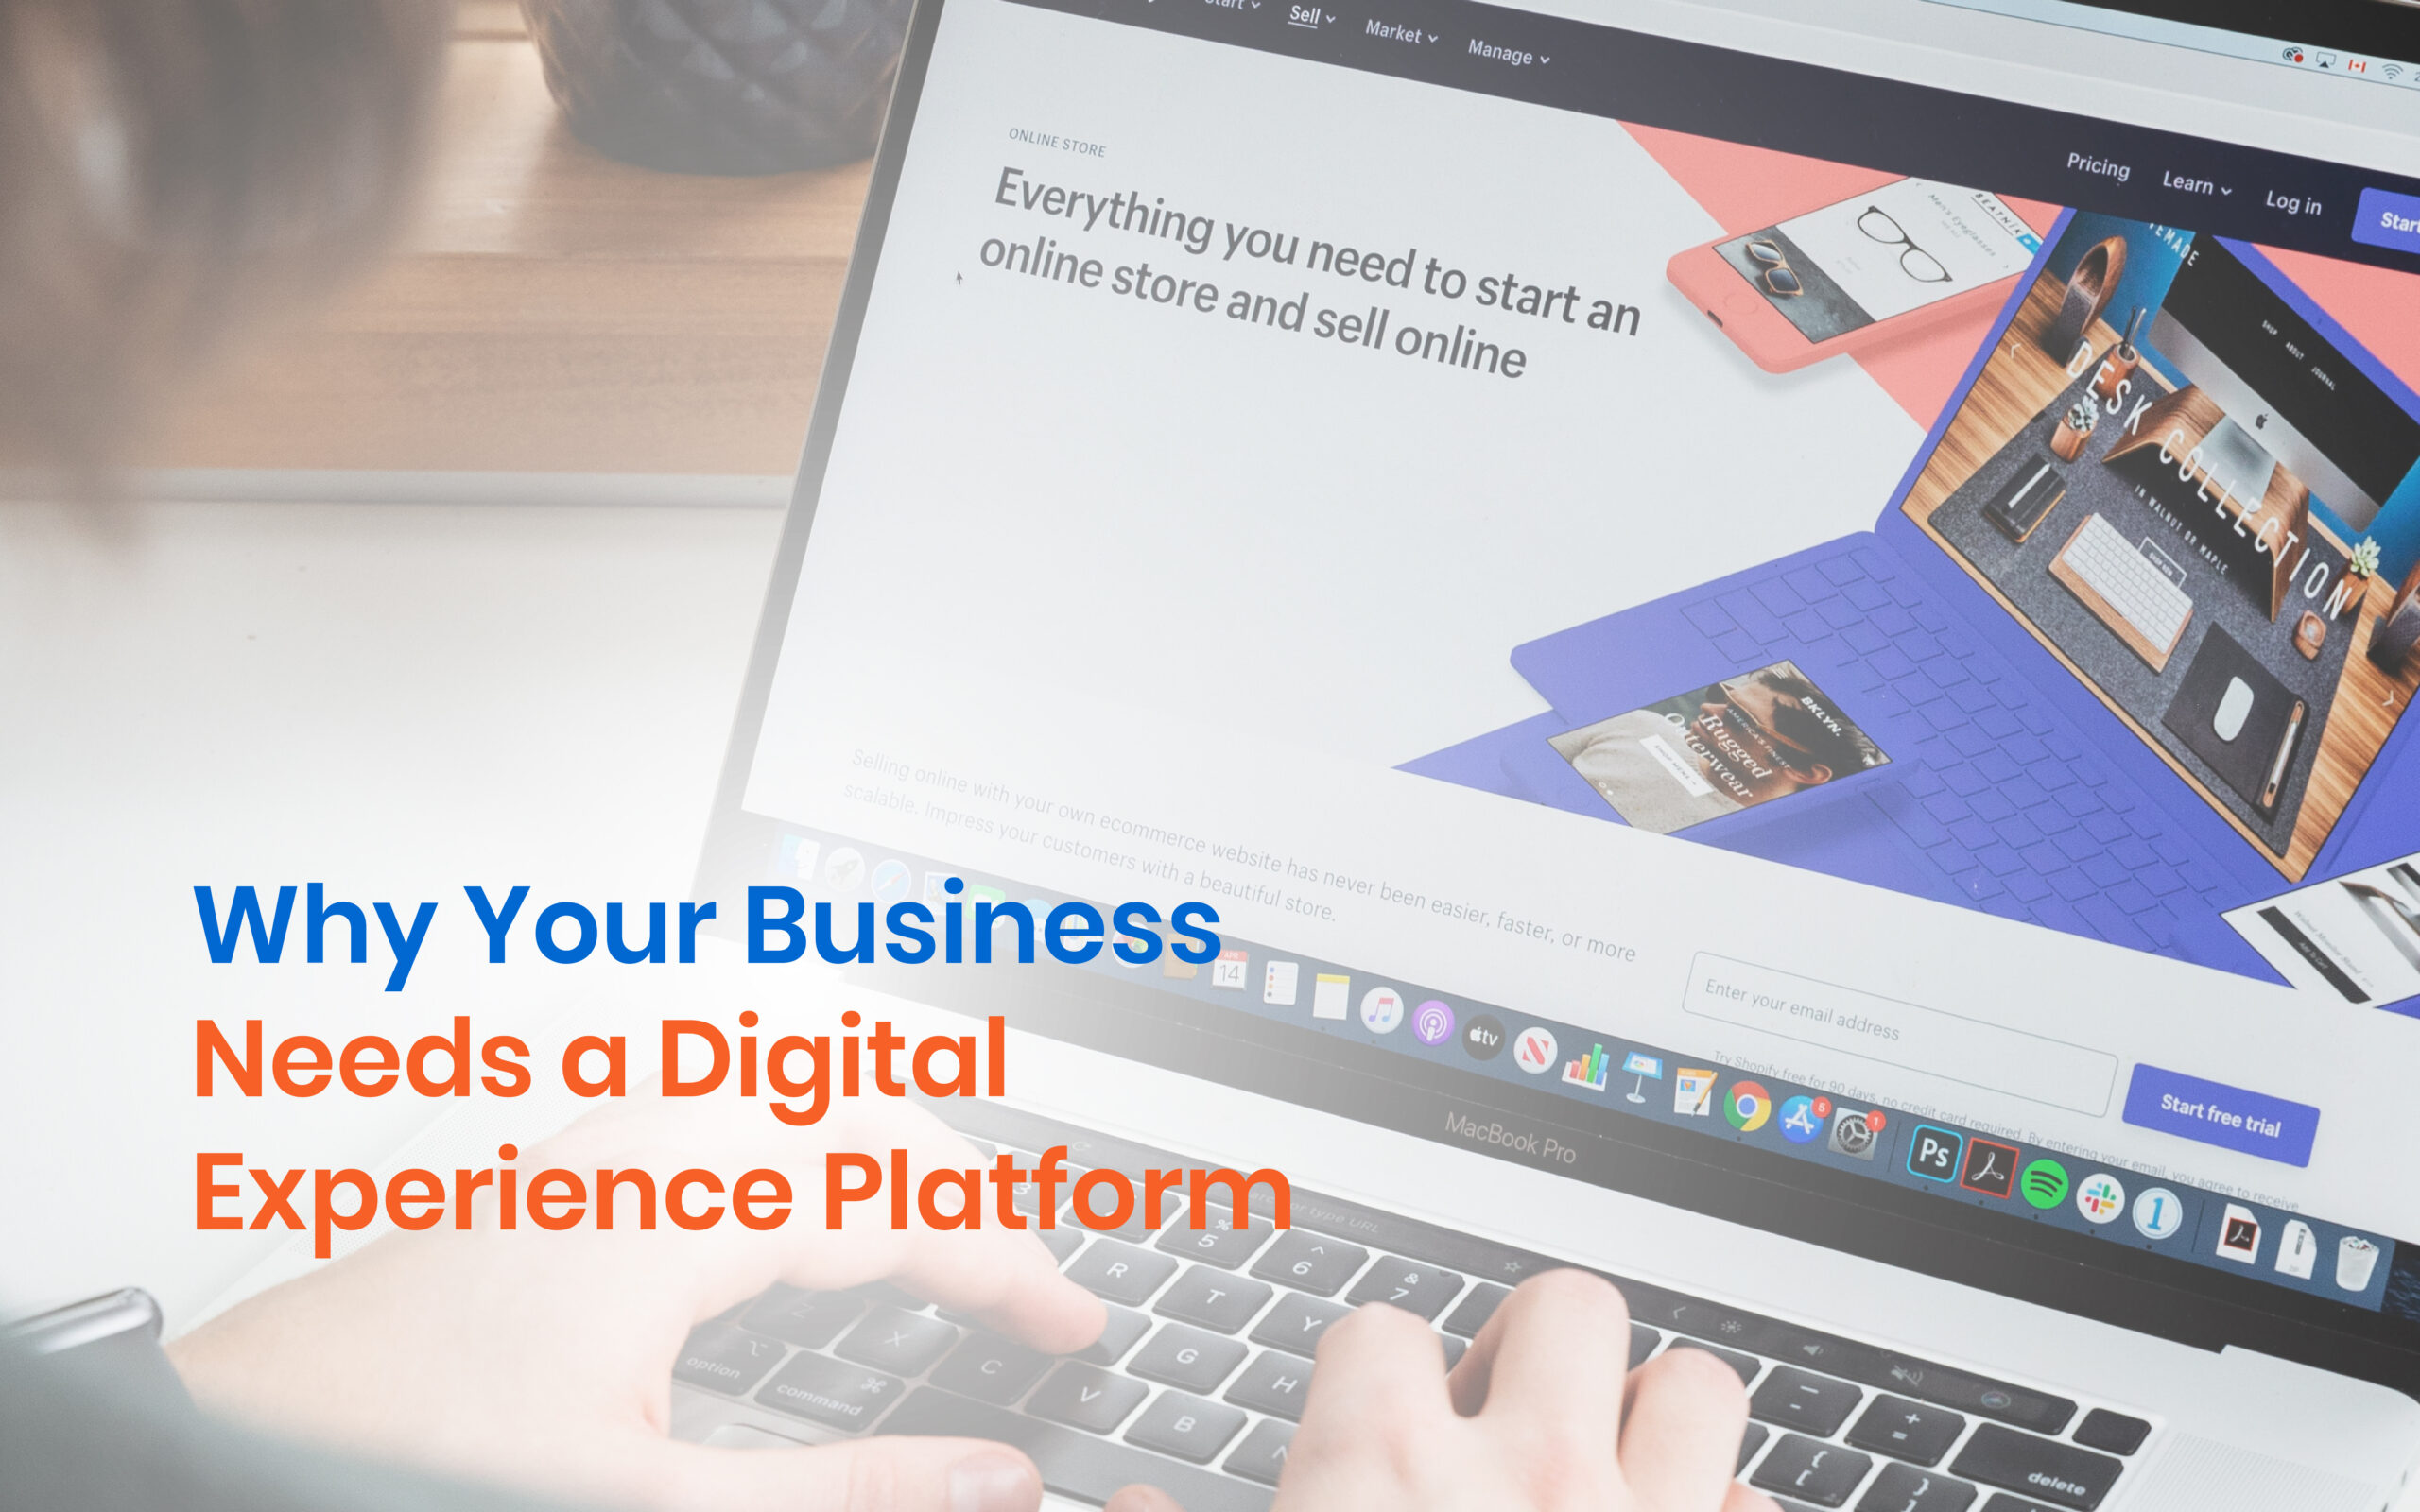 Why Your Business Needs a Digital Experience Platform